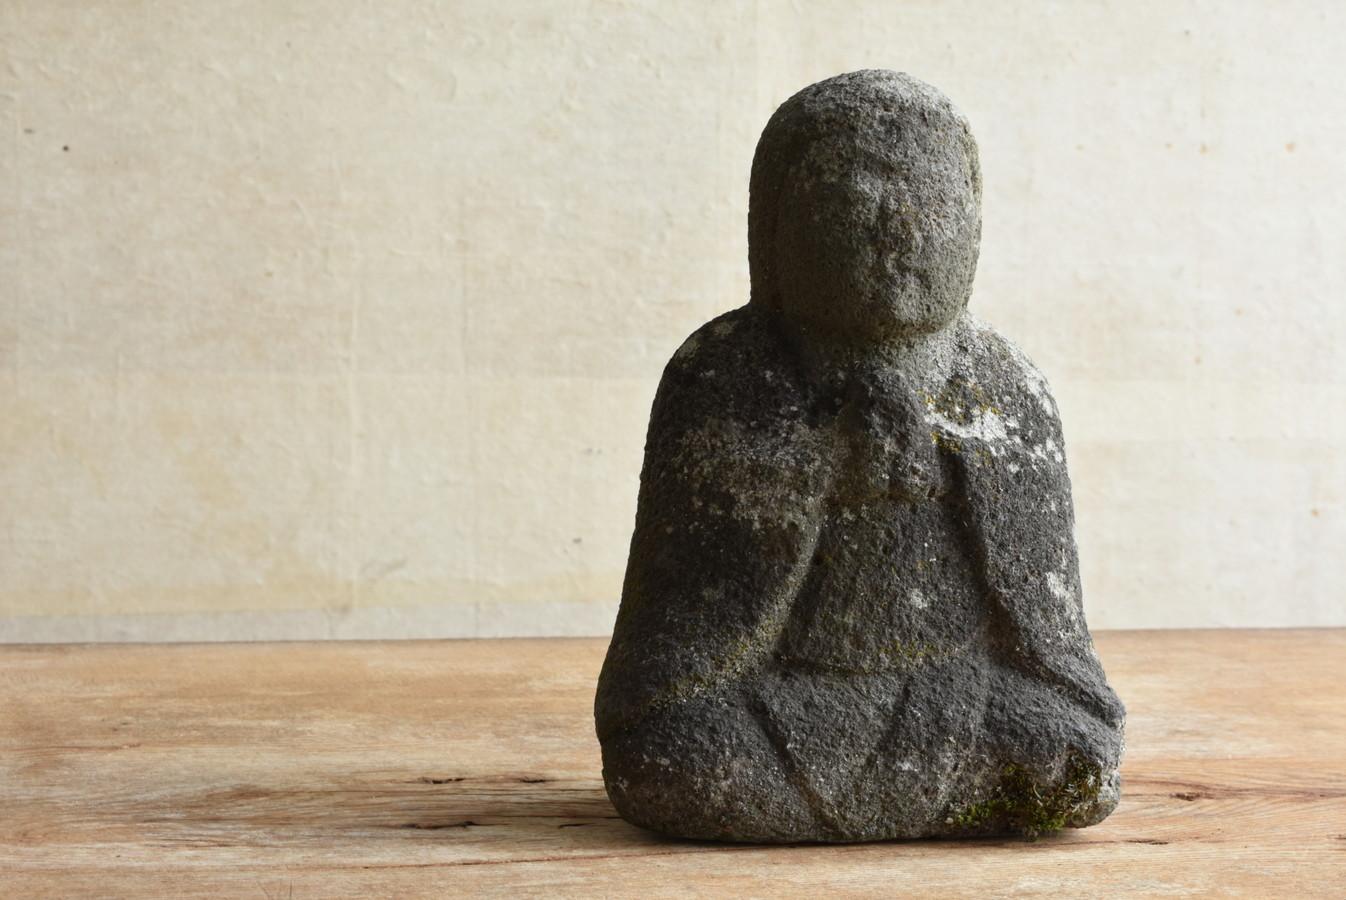 It is a Japanese Edo period (1800s) stone Buddha statue made of andesite.
This Buddha statue has folded hands and is probably a bodhisattva.
Bodhisattvas are benevolent beings who save people.
He is dressed like a monk and stands still with his